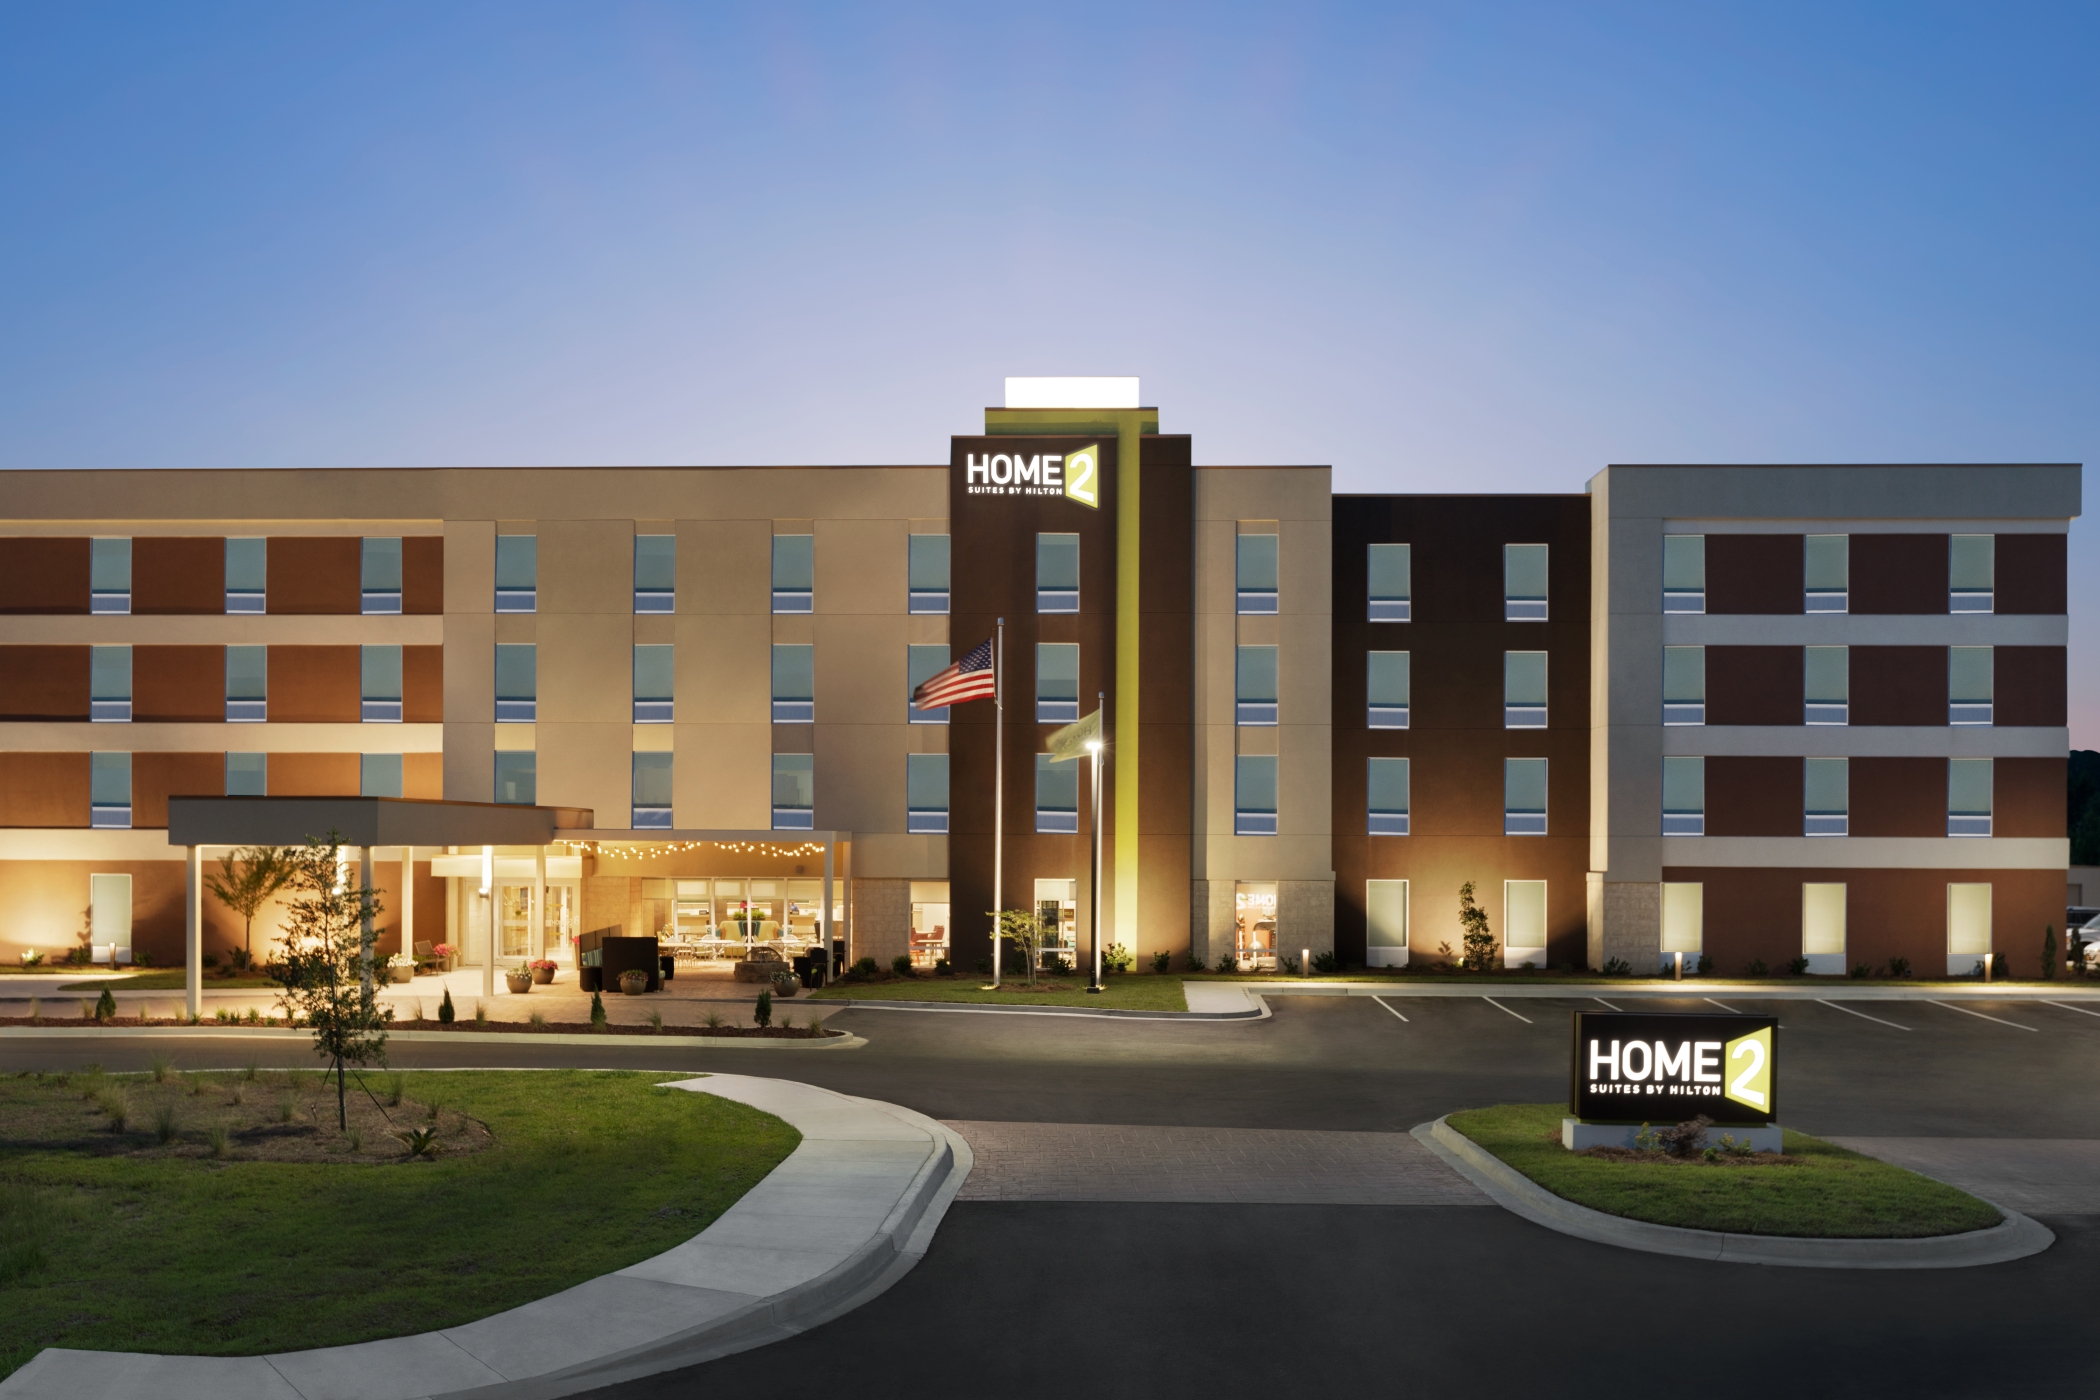 Hilton's yet-to-be-officially-announced new extended-stay brand will sit below its Home2 Suites by Hilton brand. More than 550 Home2 Suites hotels were open globally at the end of the first quarter. (Hilton)